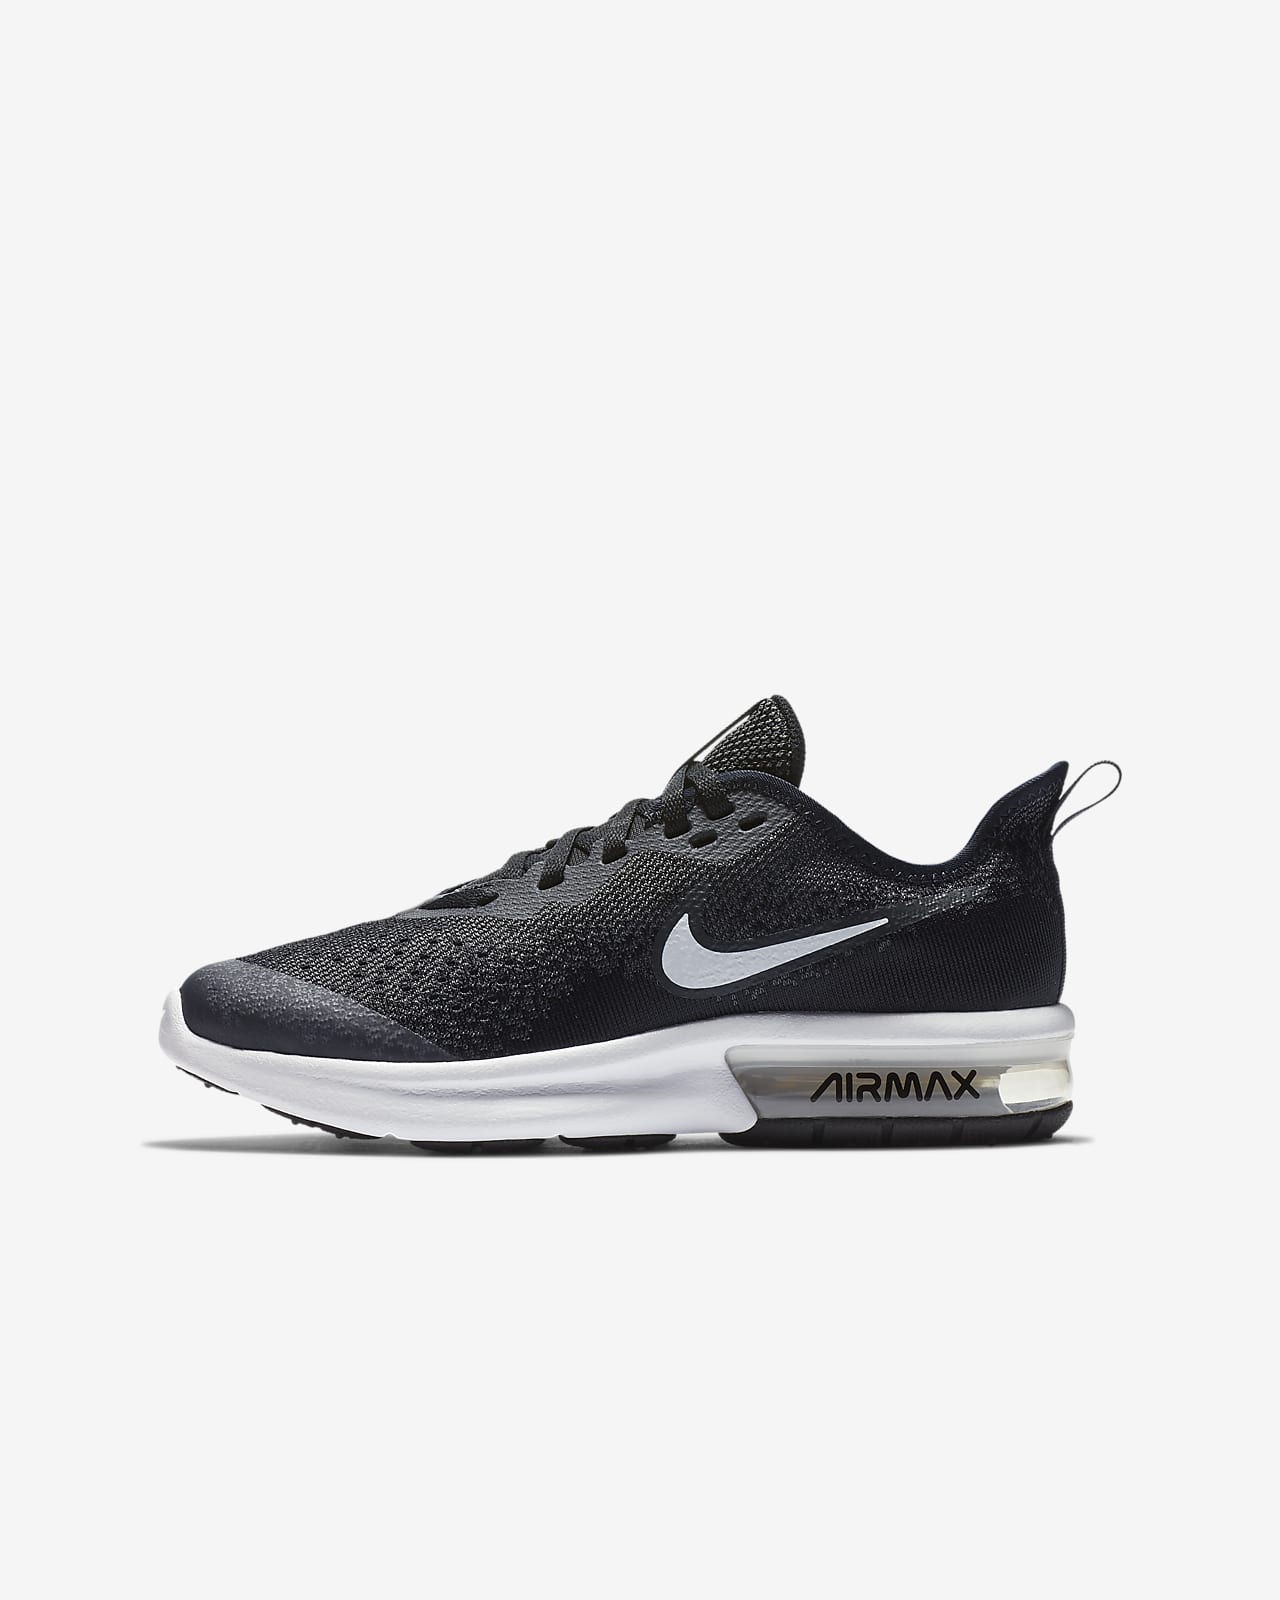 nike sequent 4 women's